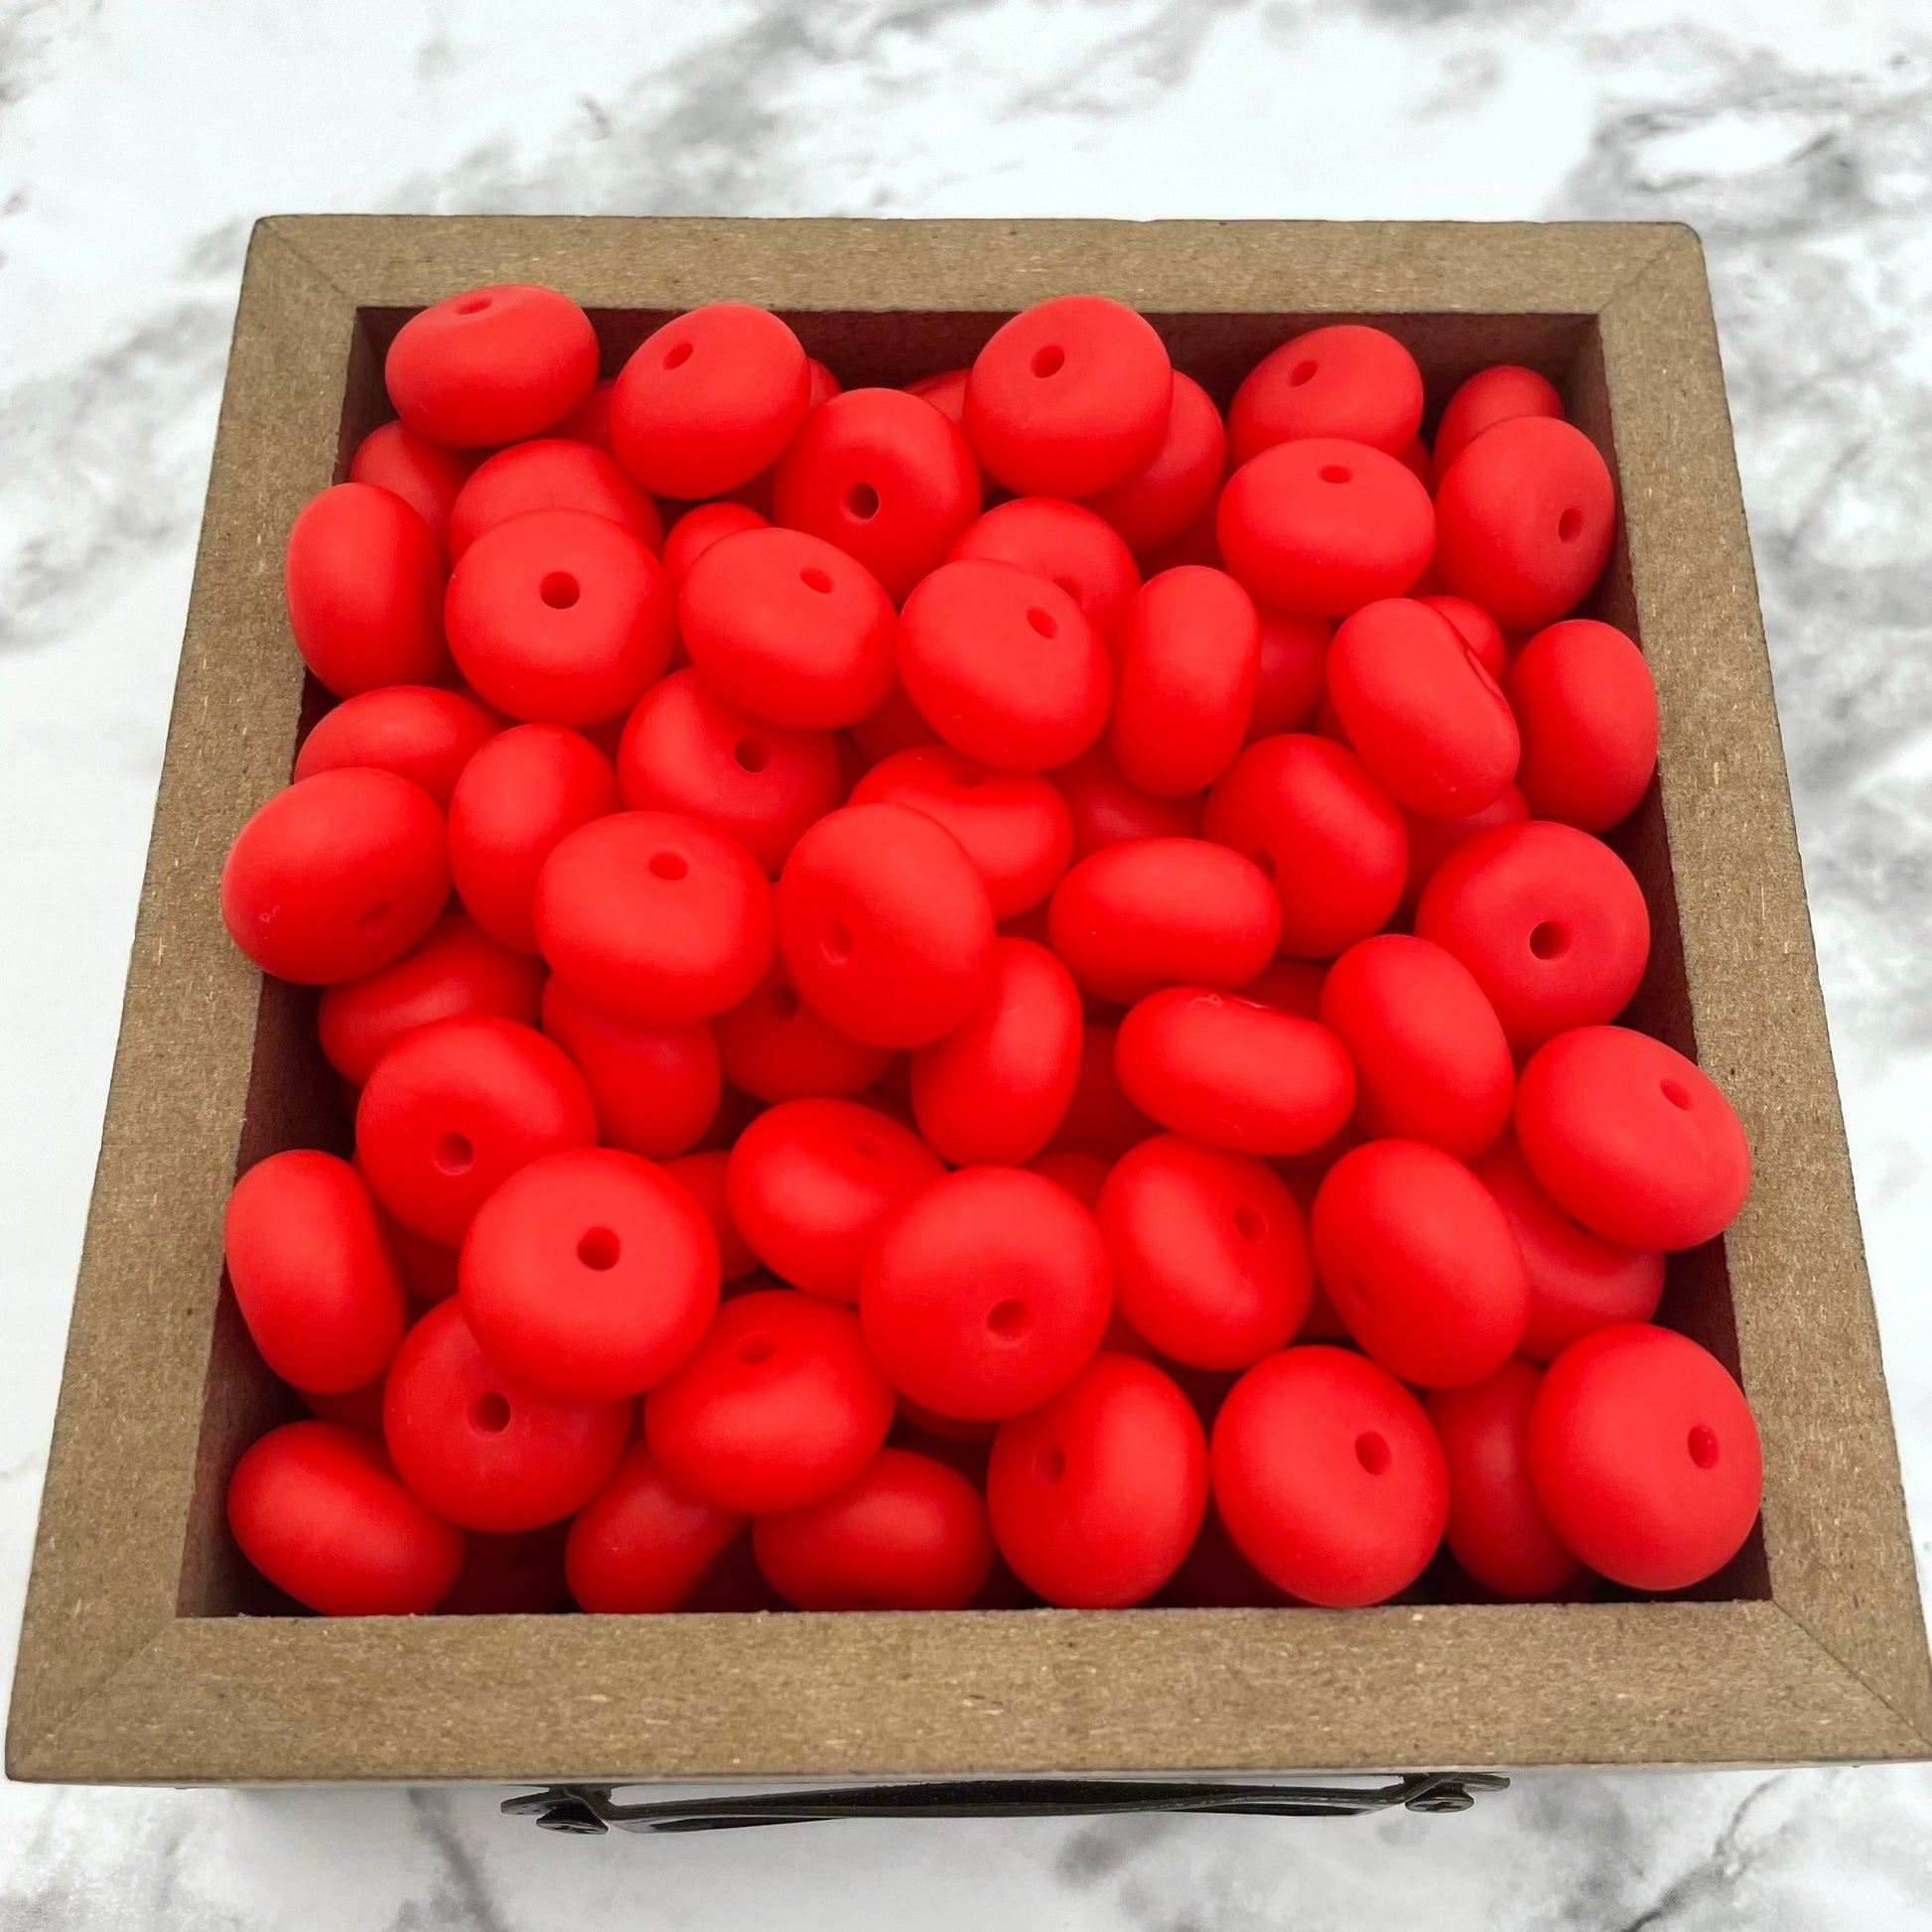 Strawberry - Silicone Beads